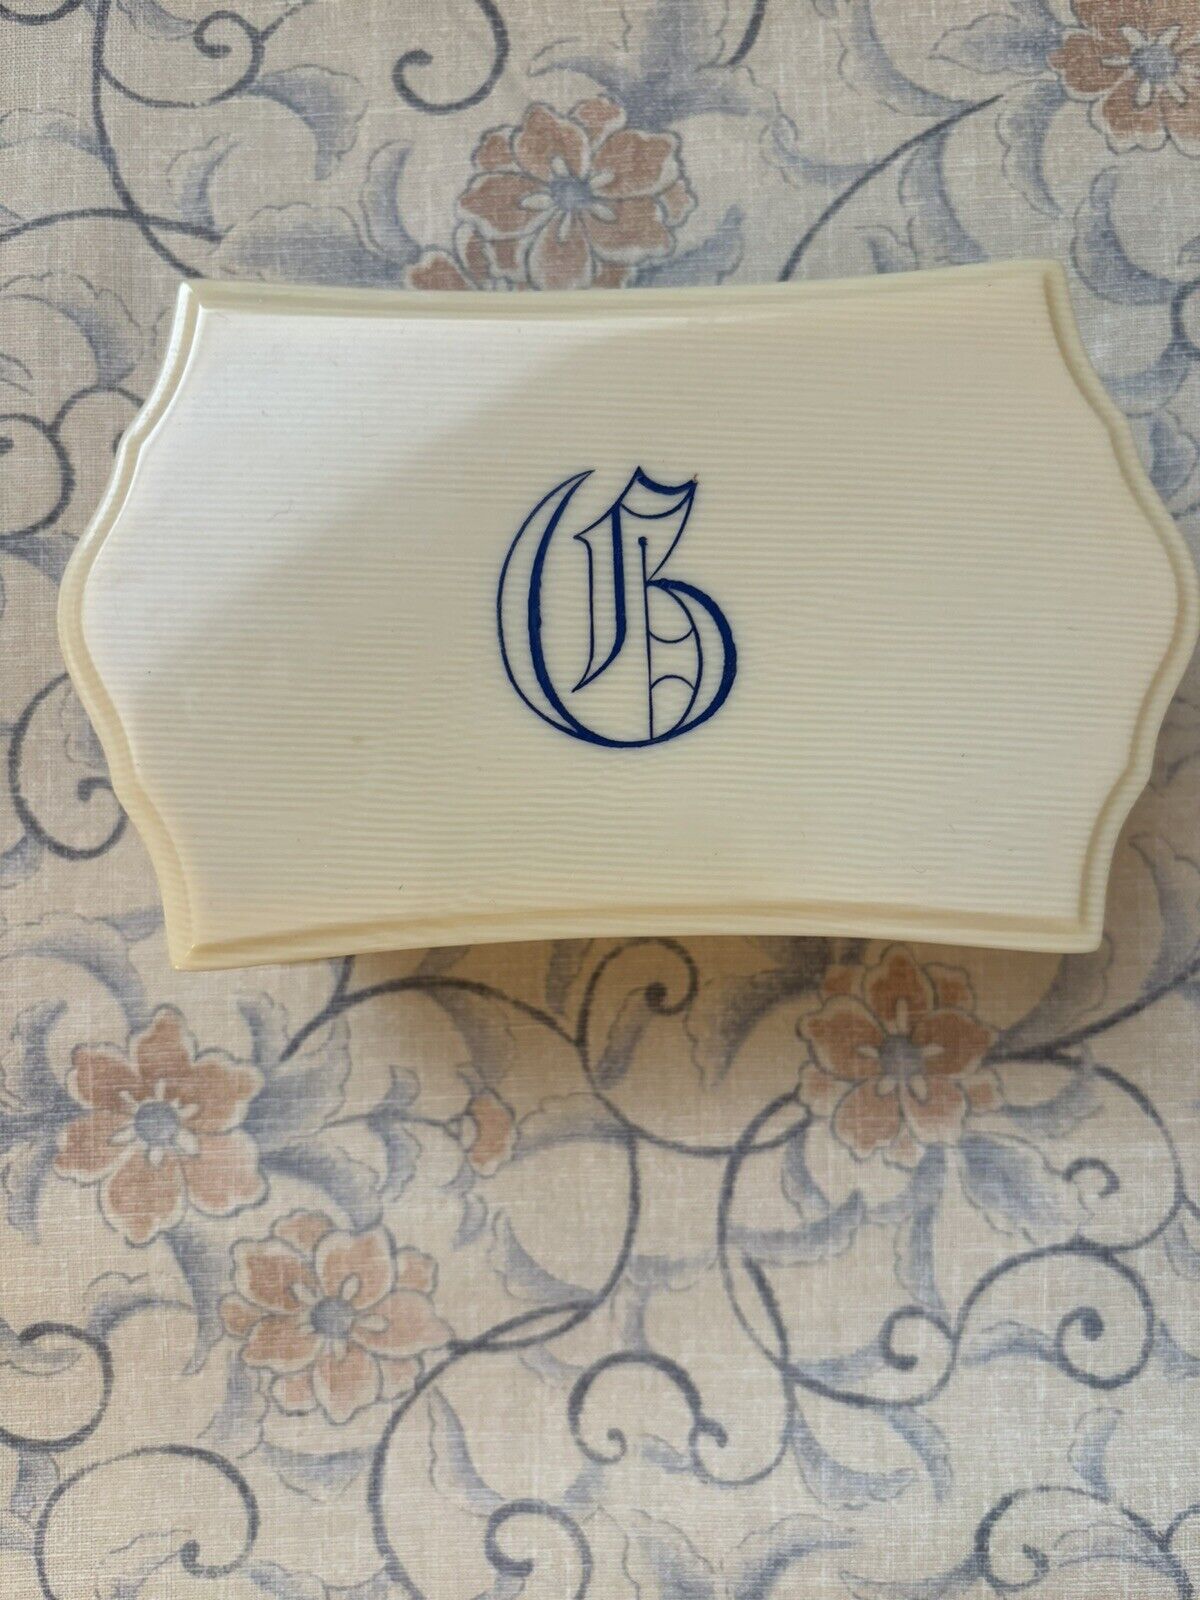 Vintage Celluloid Lined Monogrammed Box